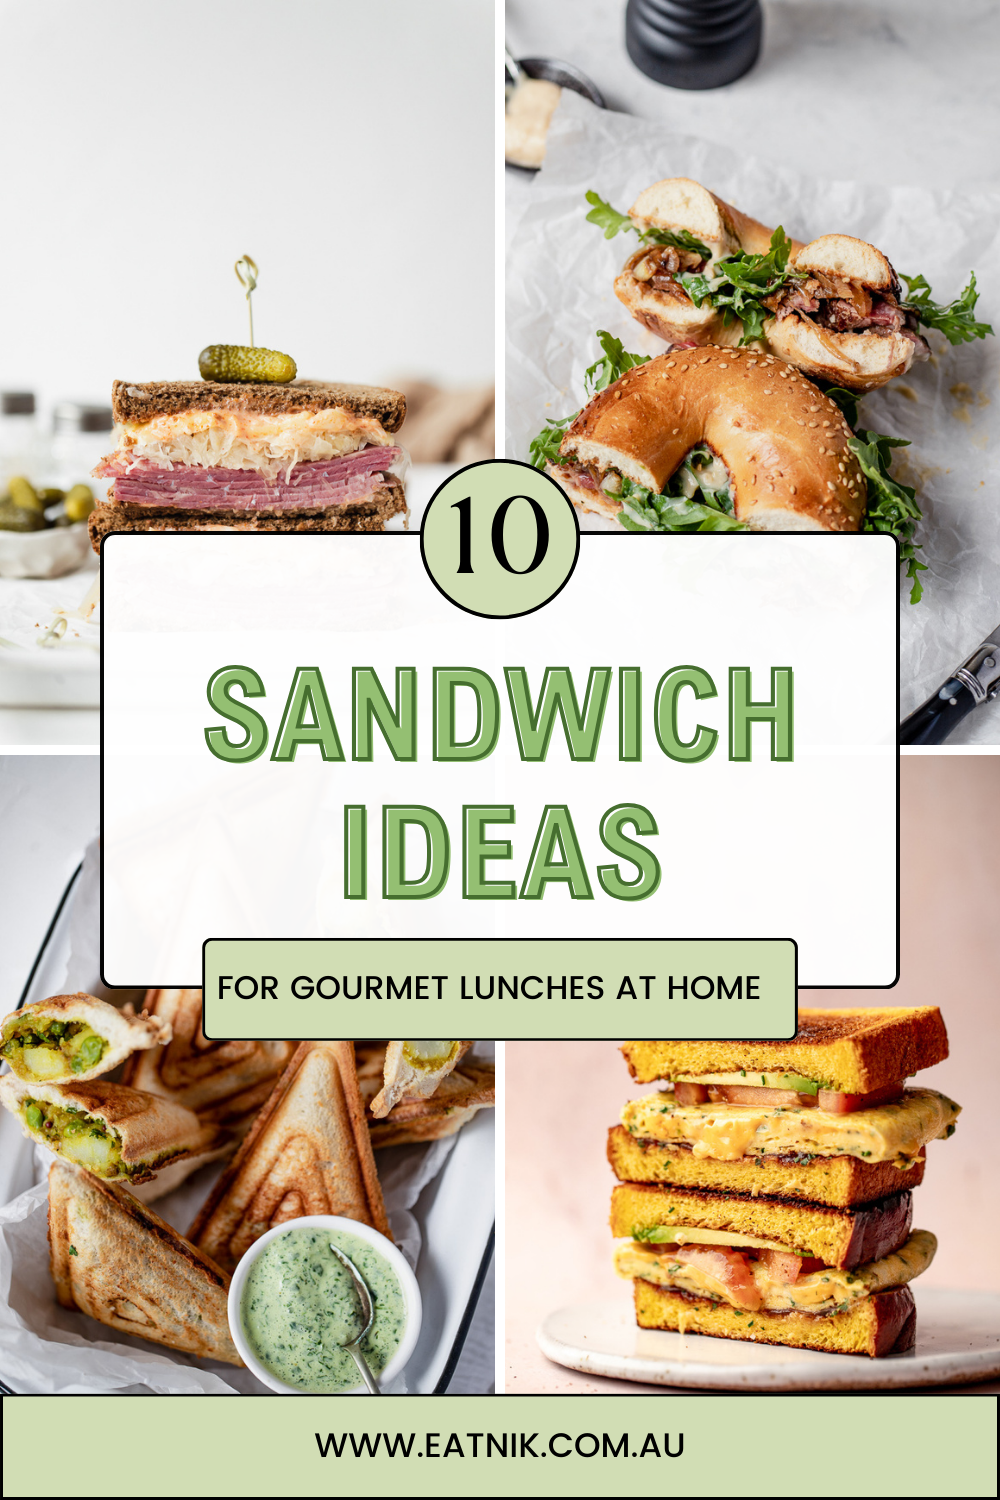 10 Sandwich Ideas for Gourmet Lunches at Home